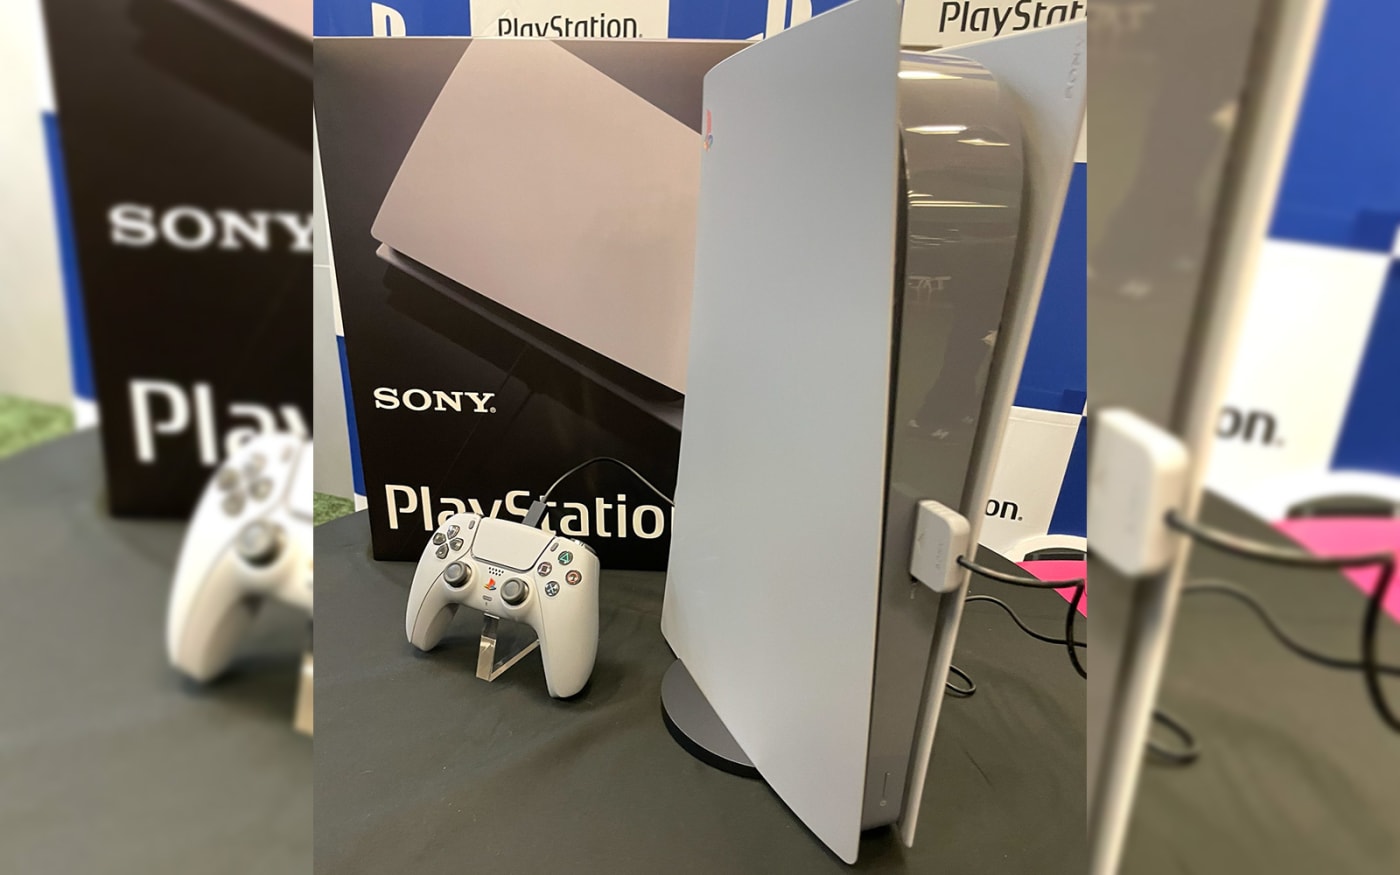 Feast your eyes on this PS1-themed PlayStation 5